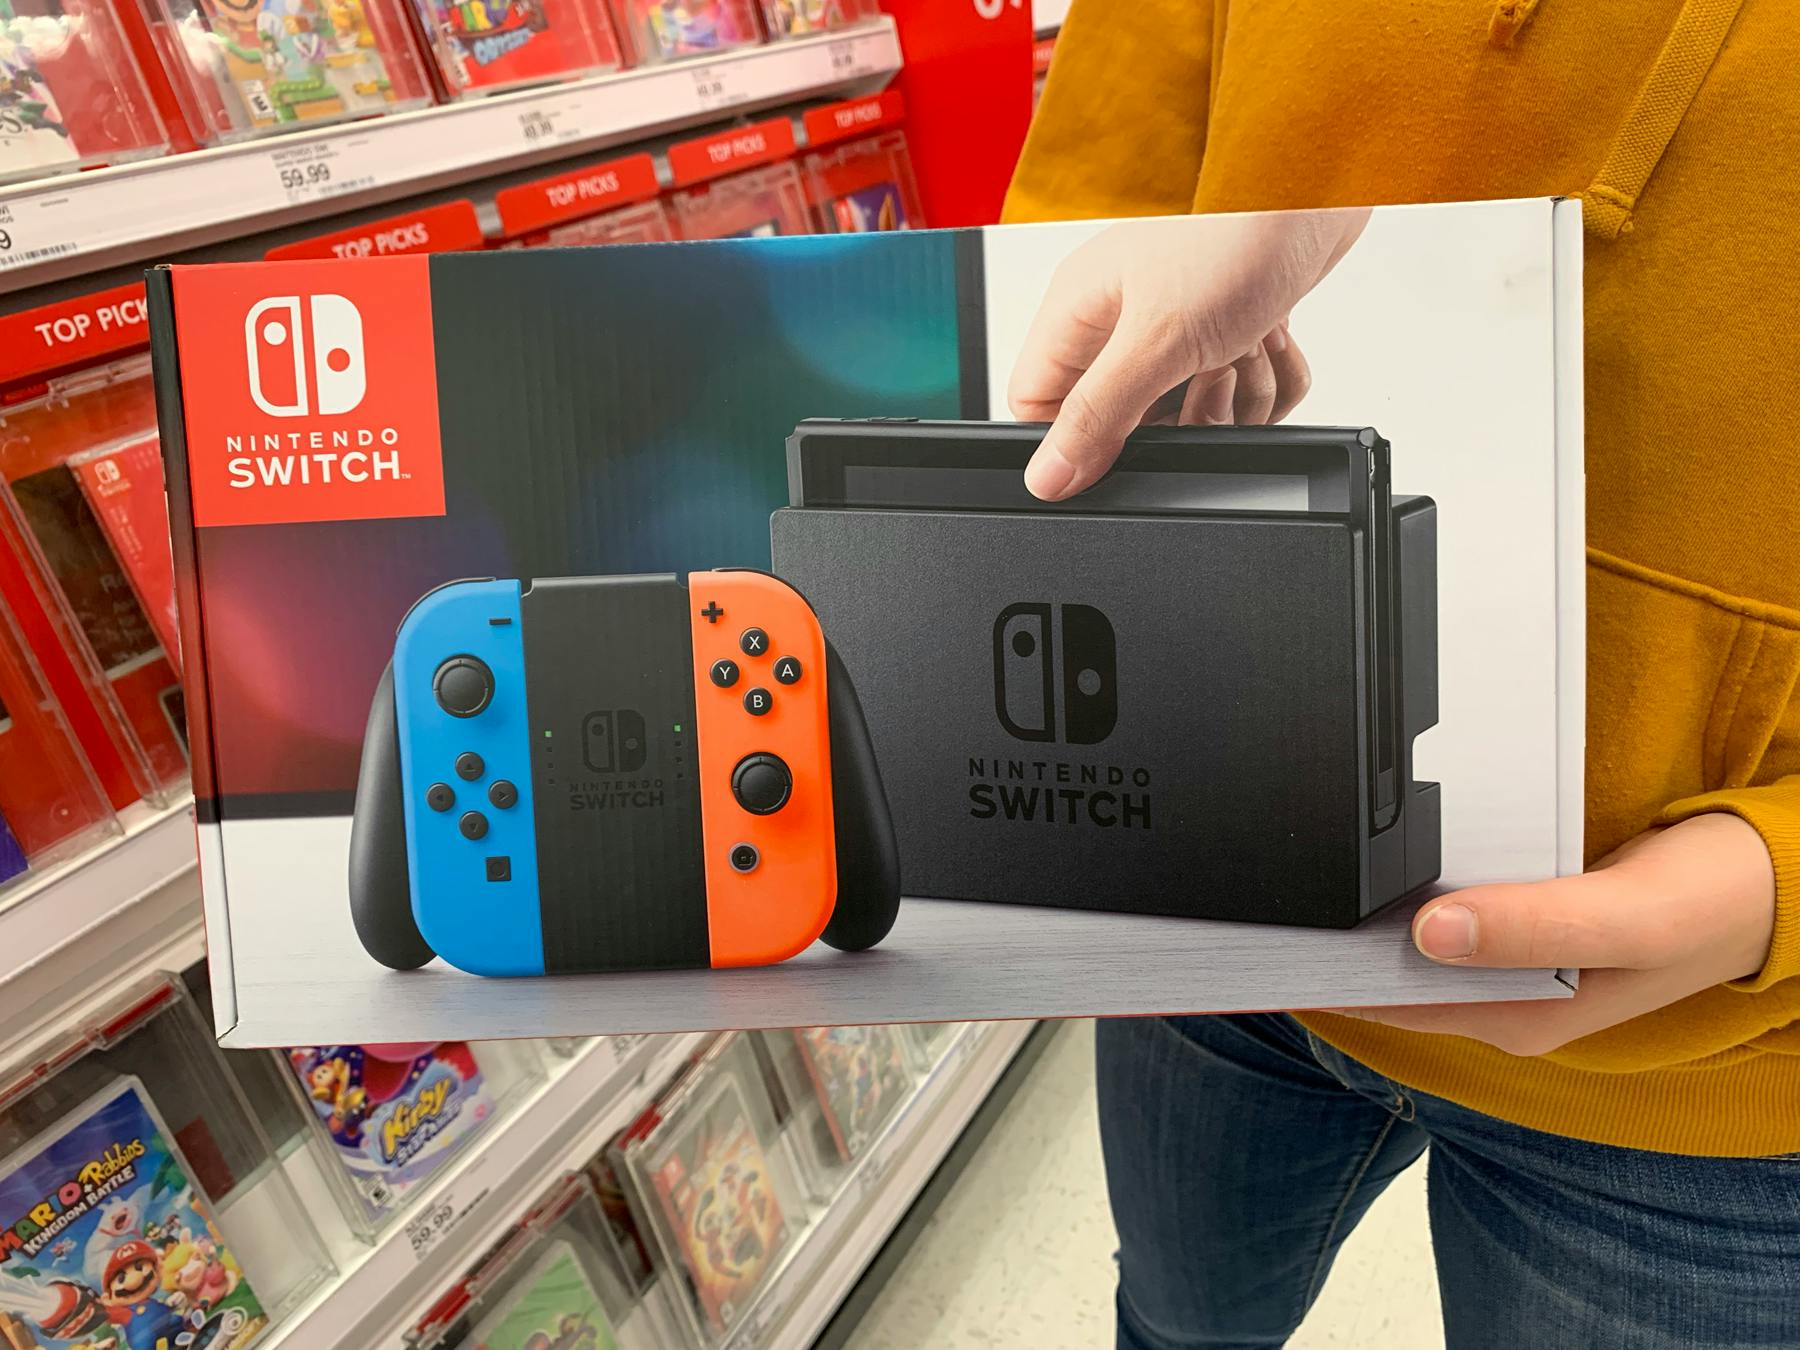 black friday target switch